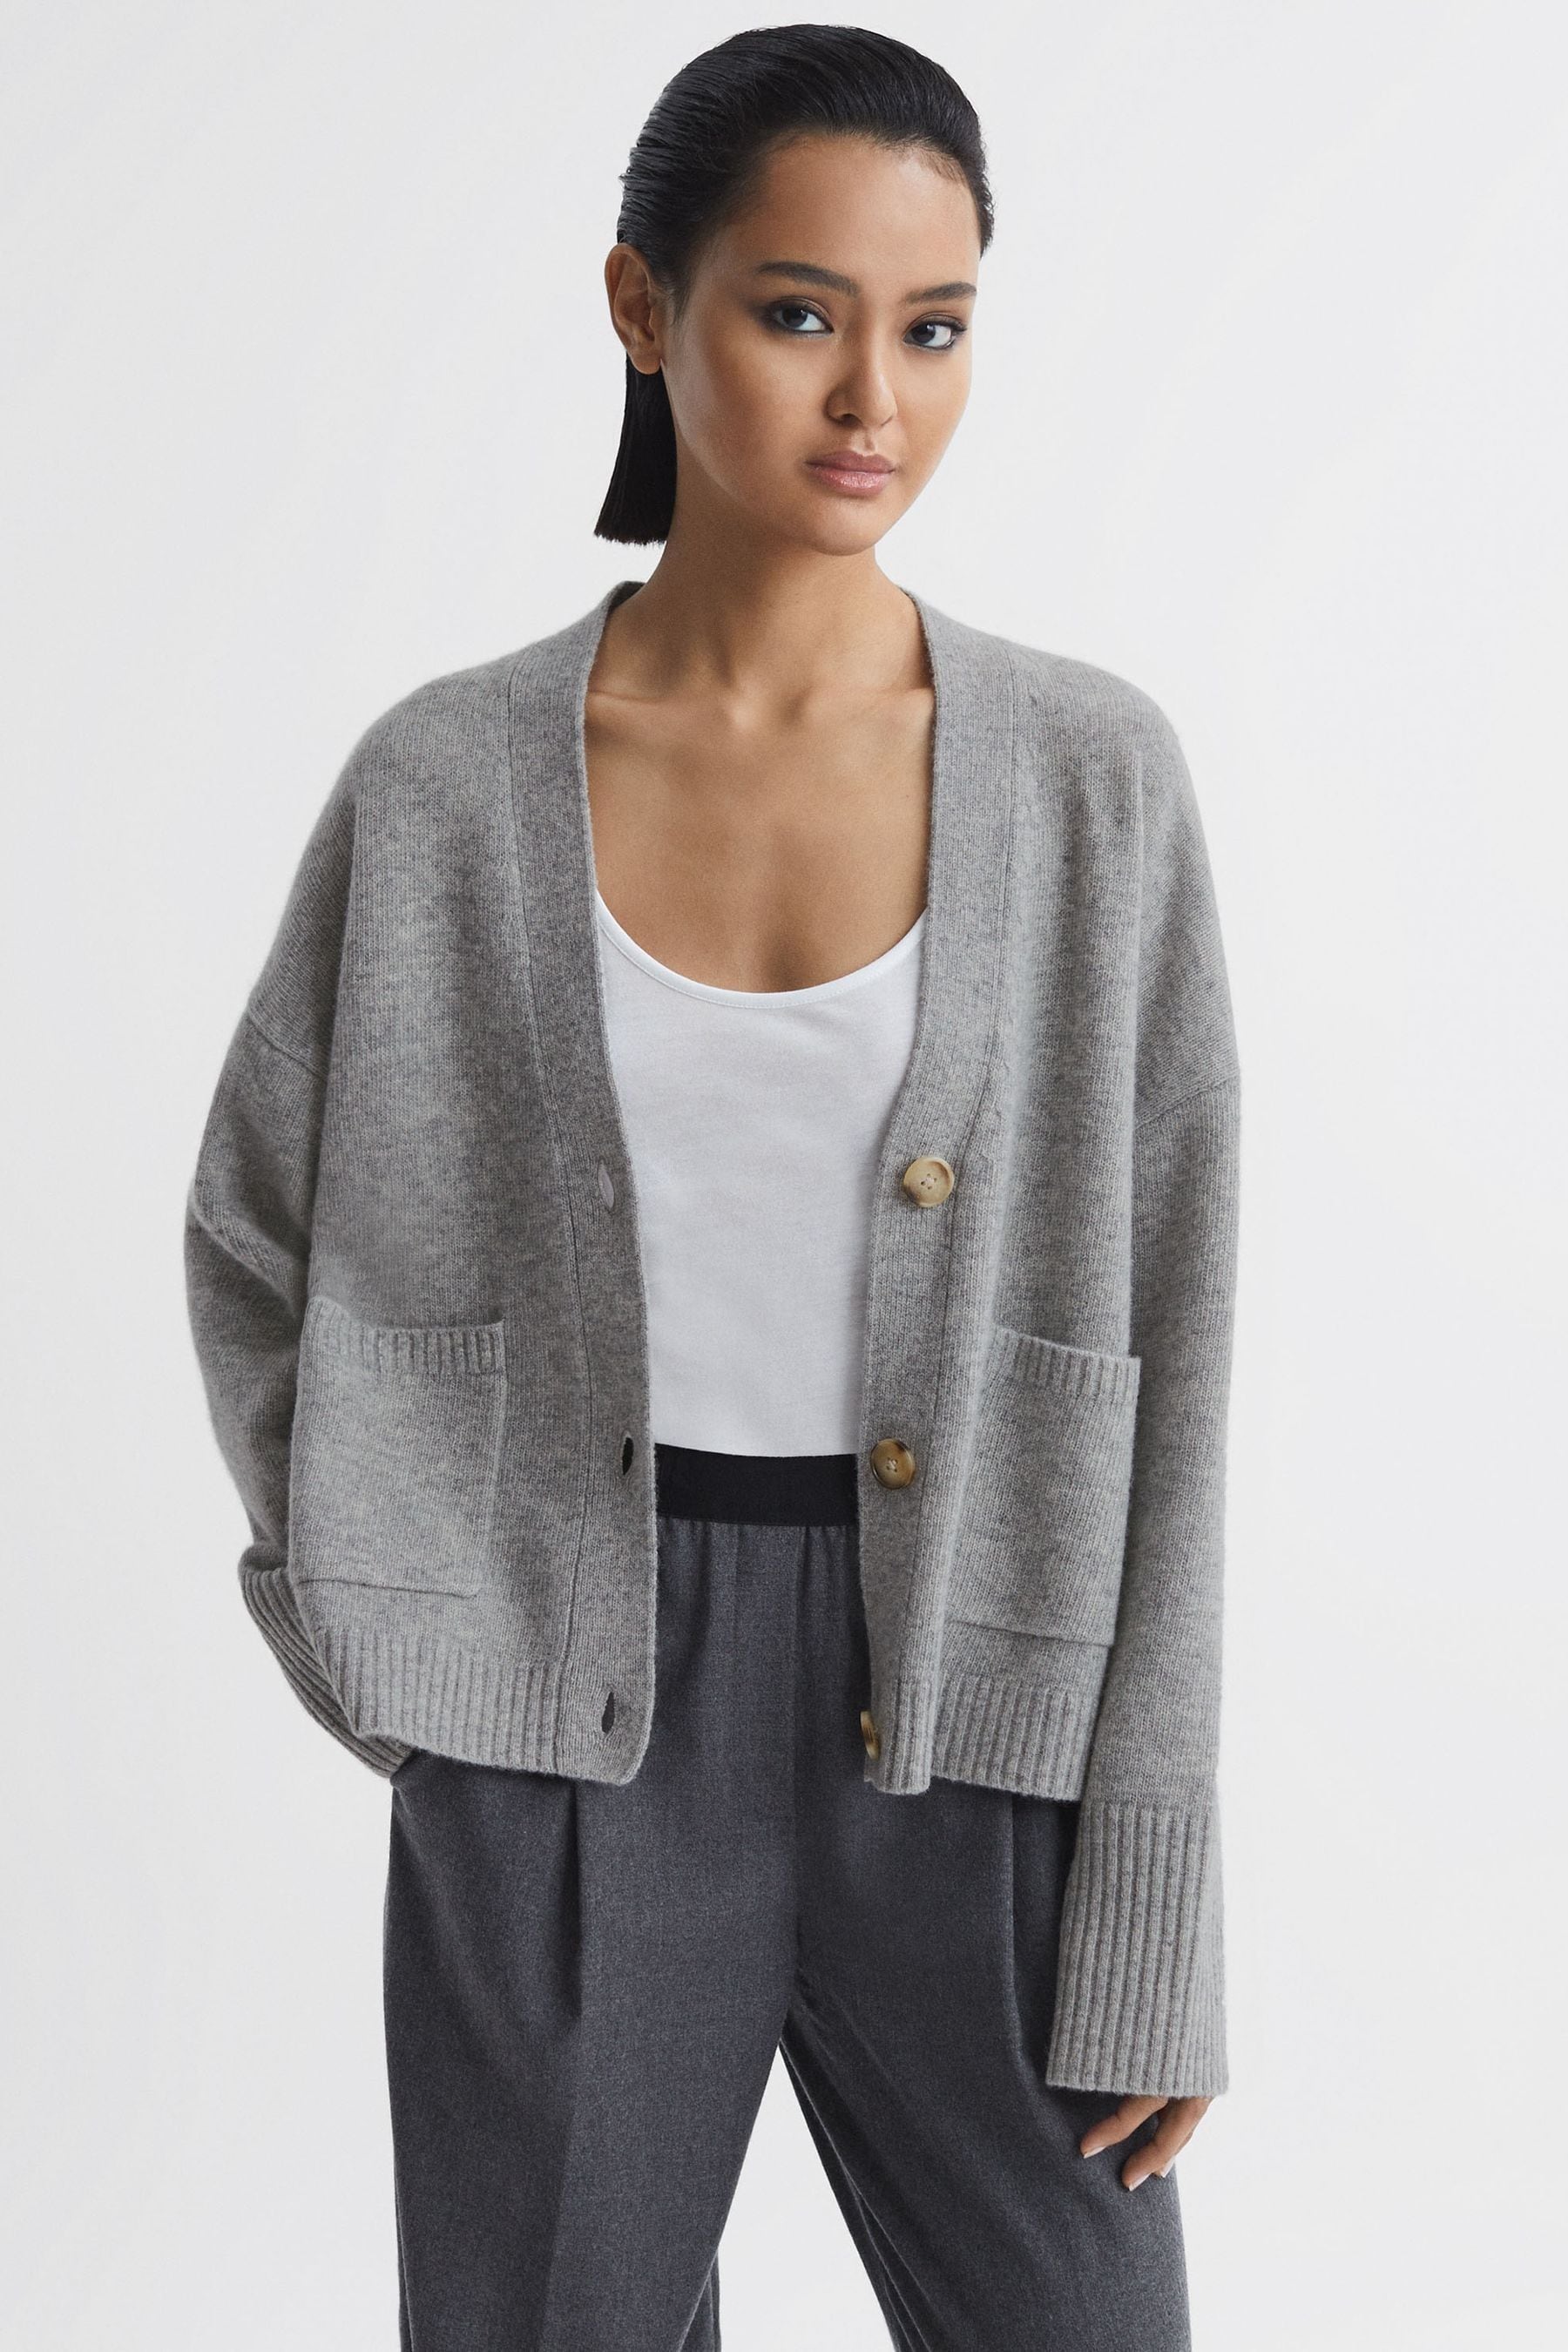 REISS JUNI - GREY MARL RELAXED WOOL-CASHMERE CARDIGAN, S